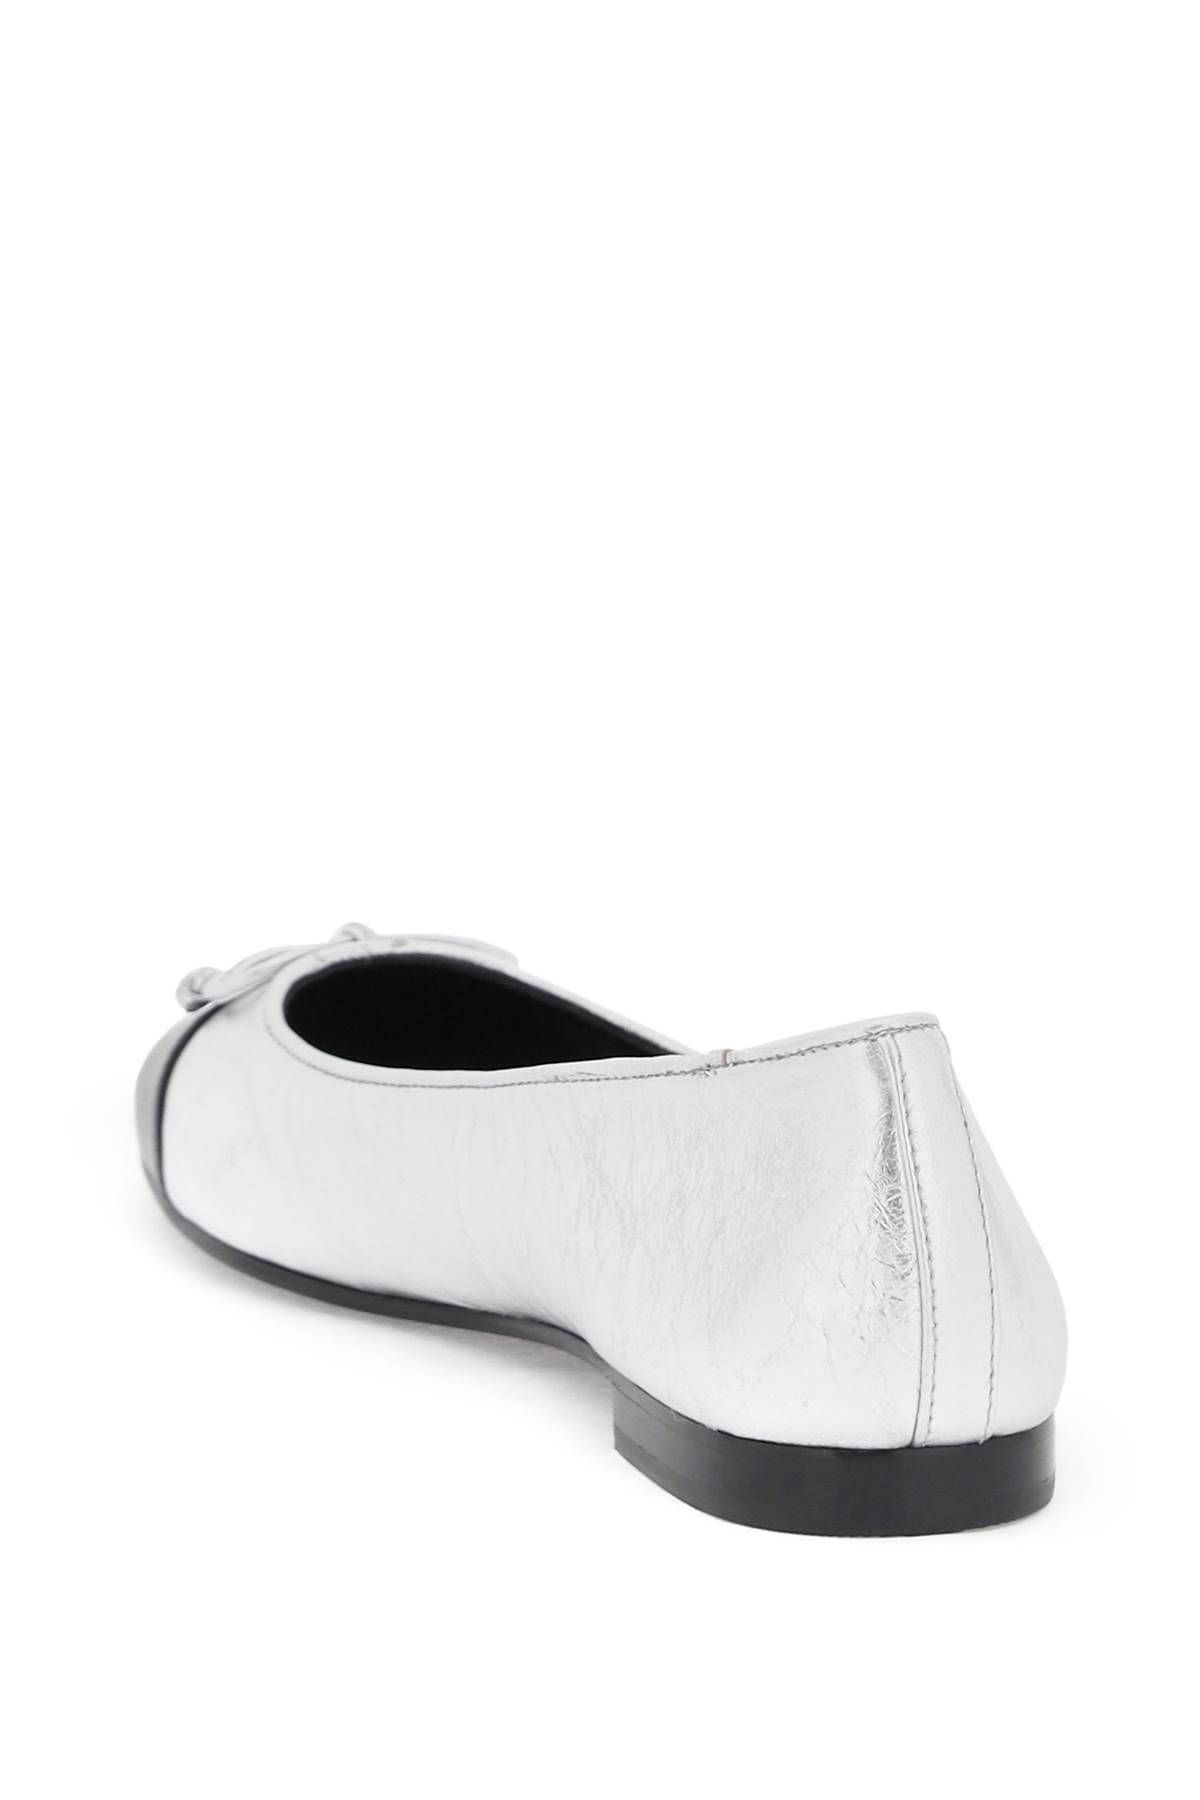 Shop Tory Burch Laminated Ballet Flats With Contrasting Toe In Silver,black